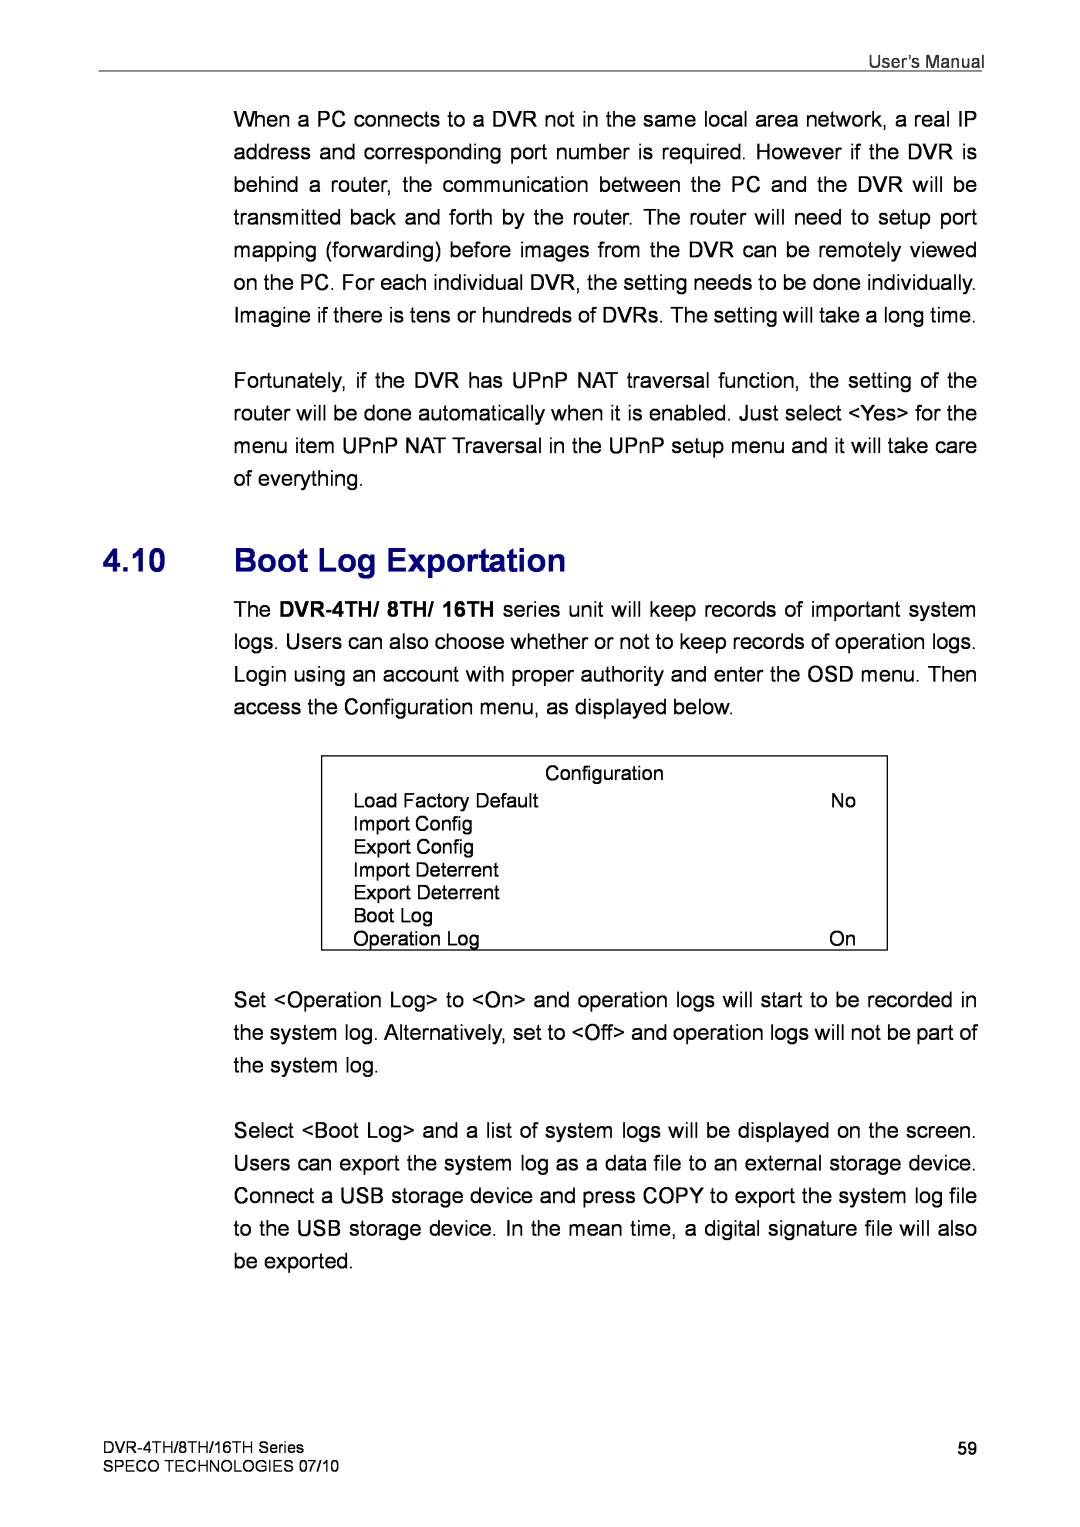 Speco Technologies 8TH, 4TH, 16TH user manual Boot Log Exportation 